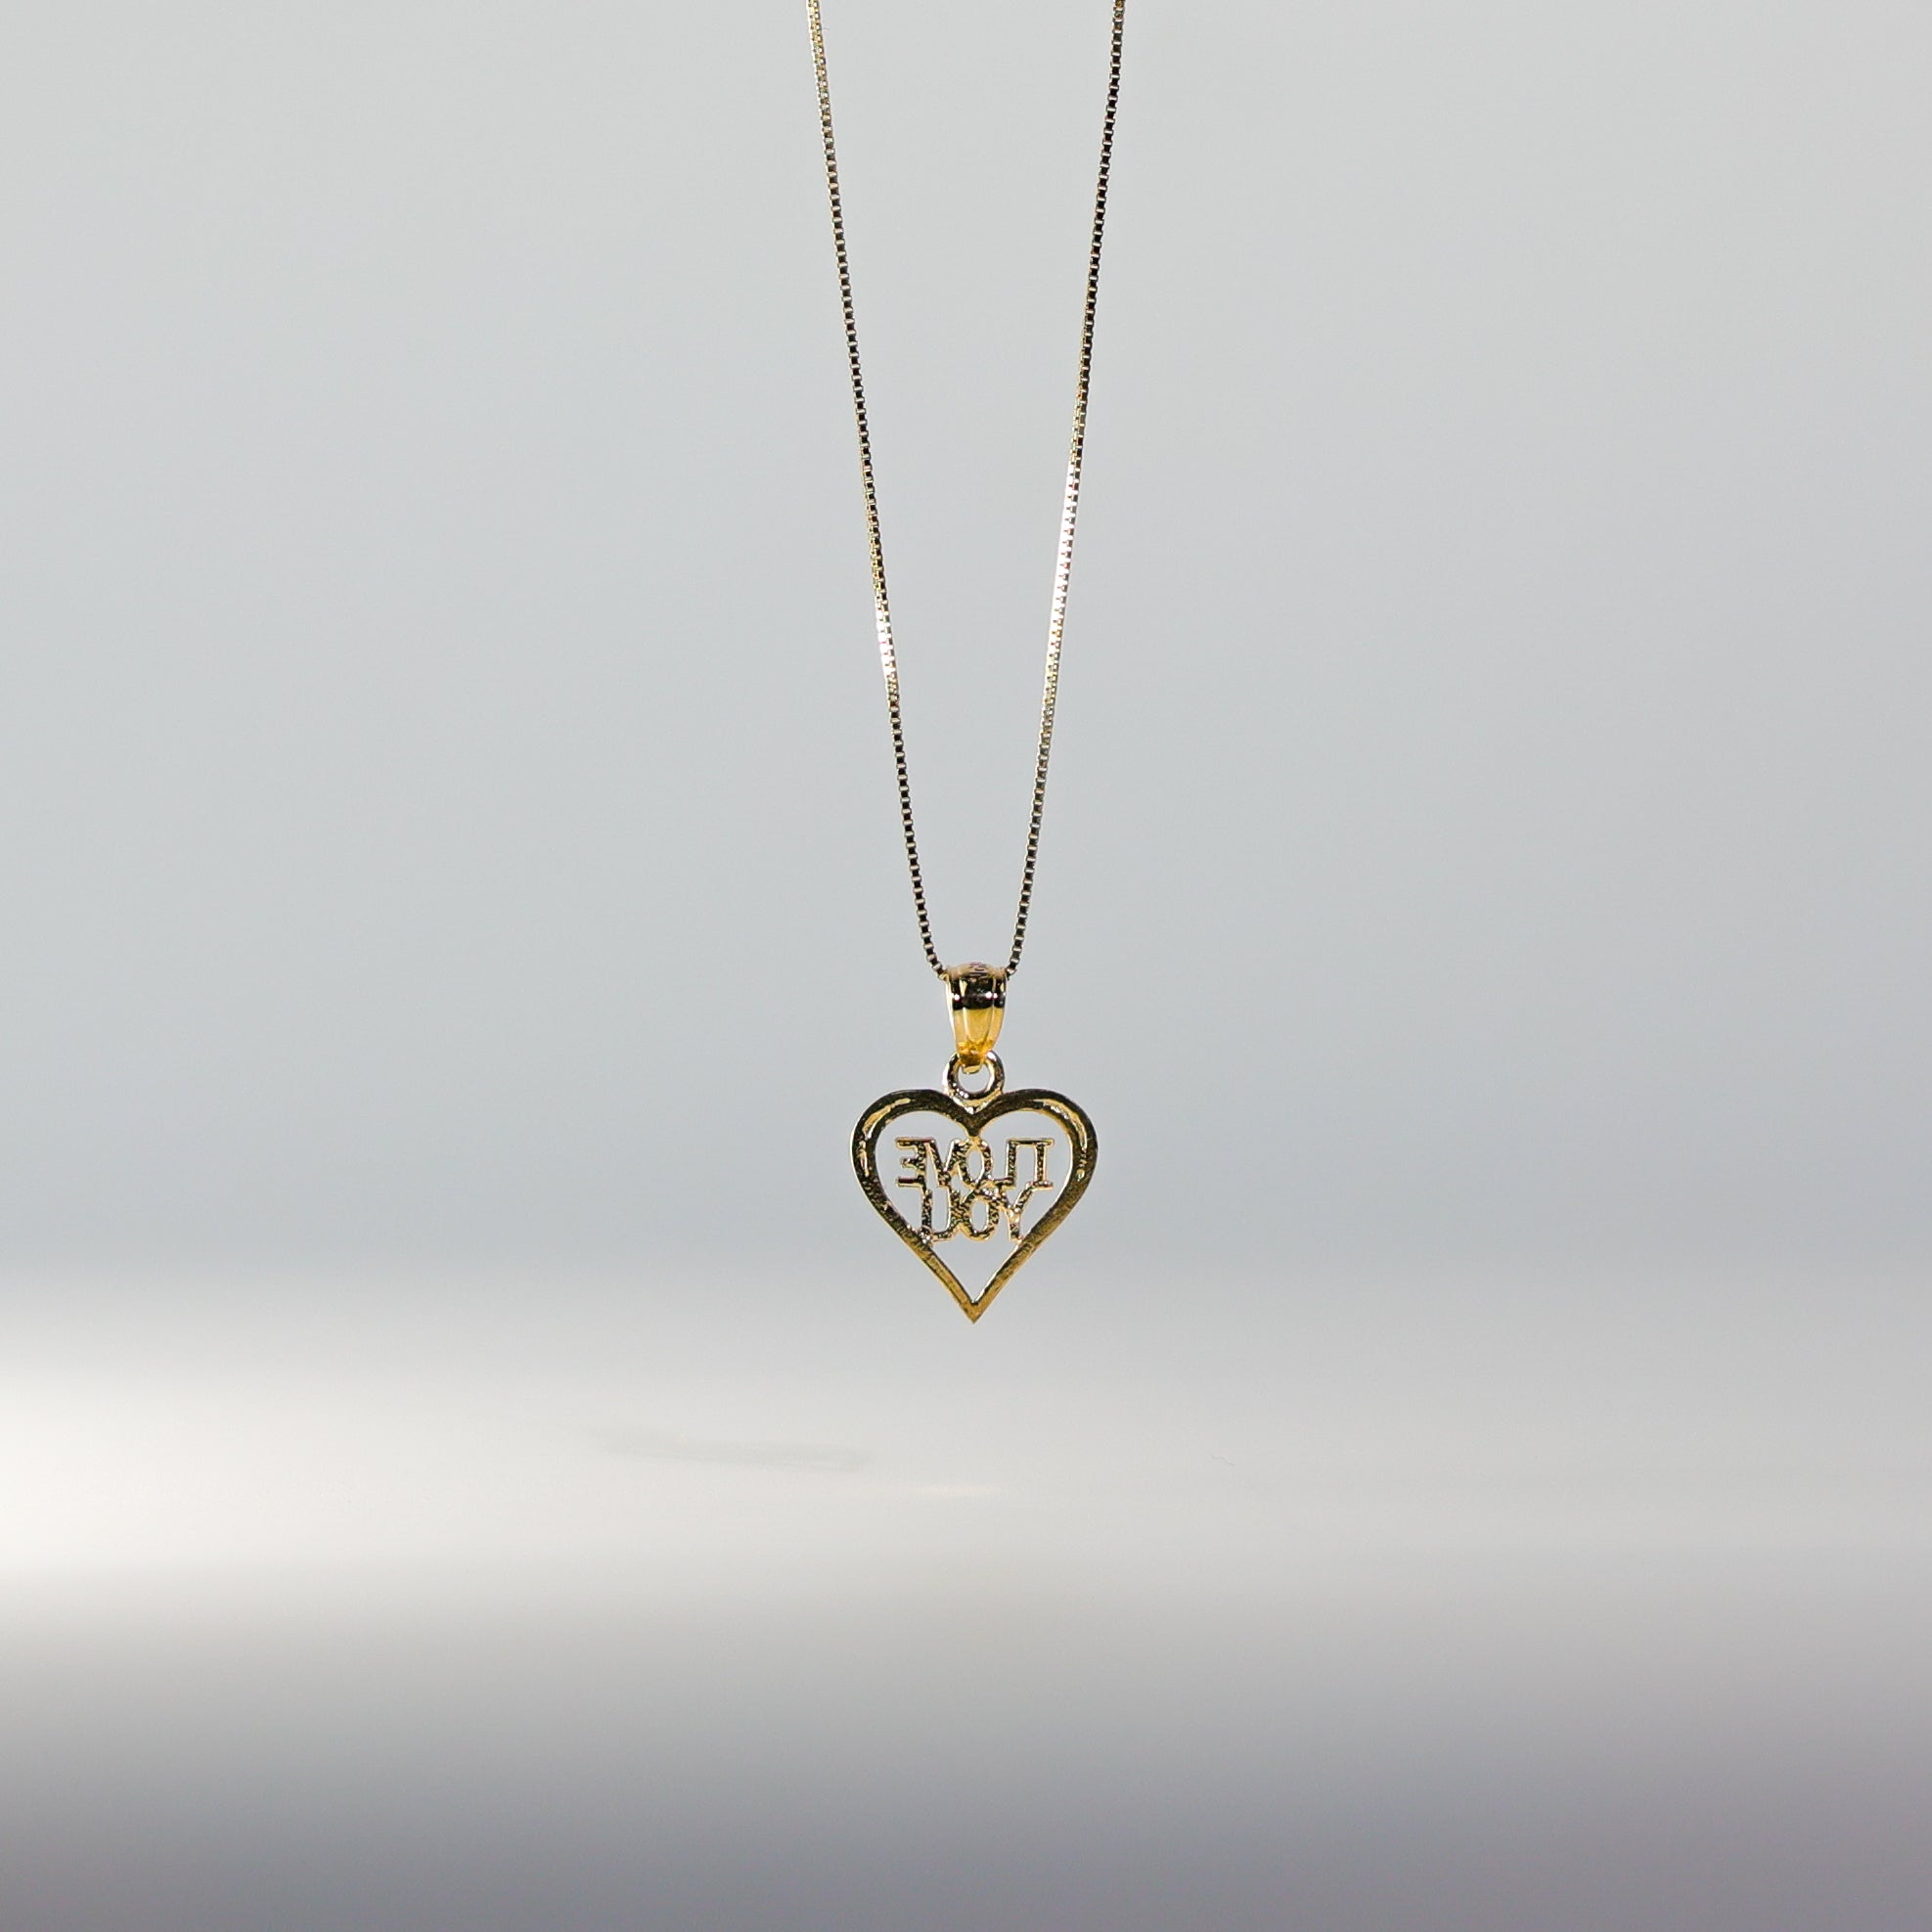 Gold I Love You Heart Pendant Model-PT1824 - Charlie & Co. Jewelry